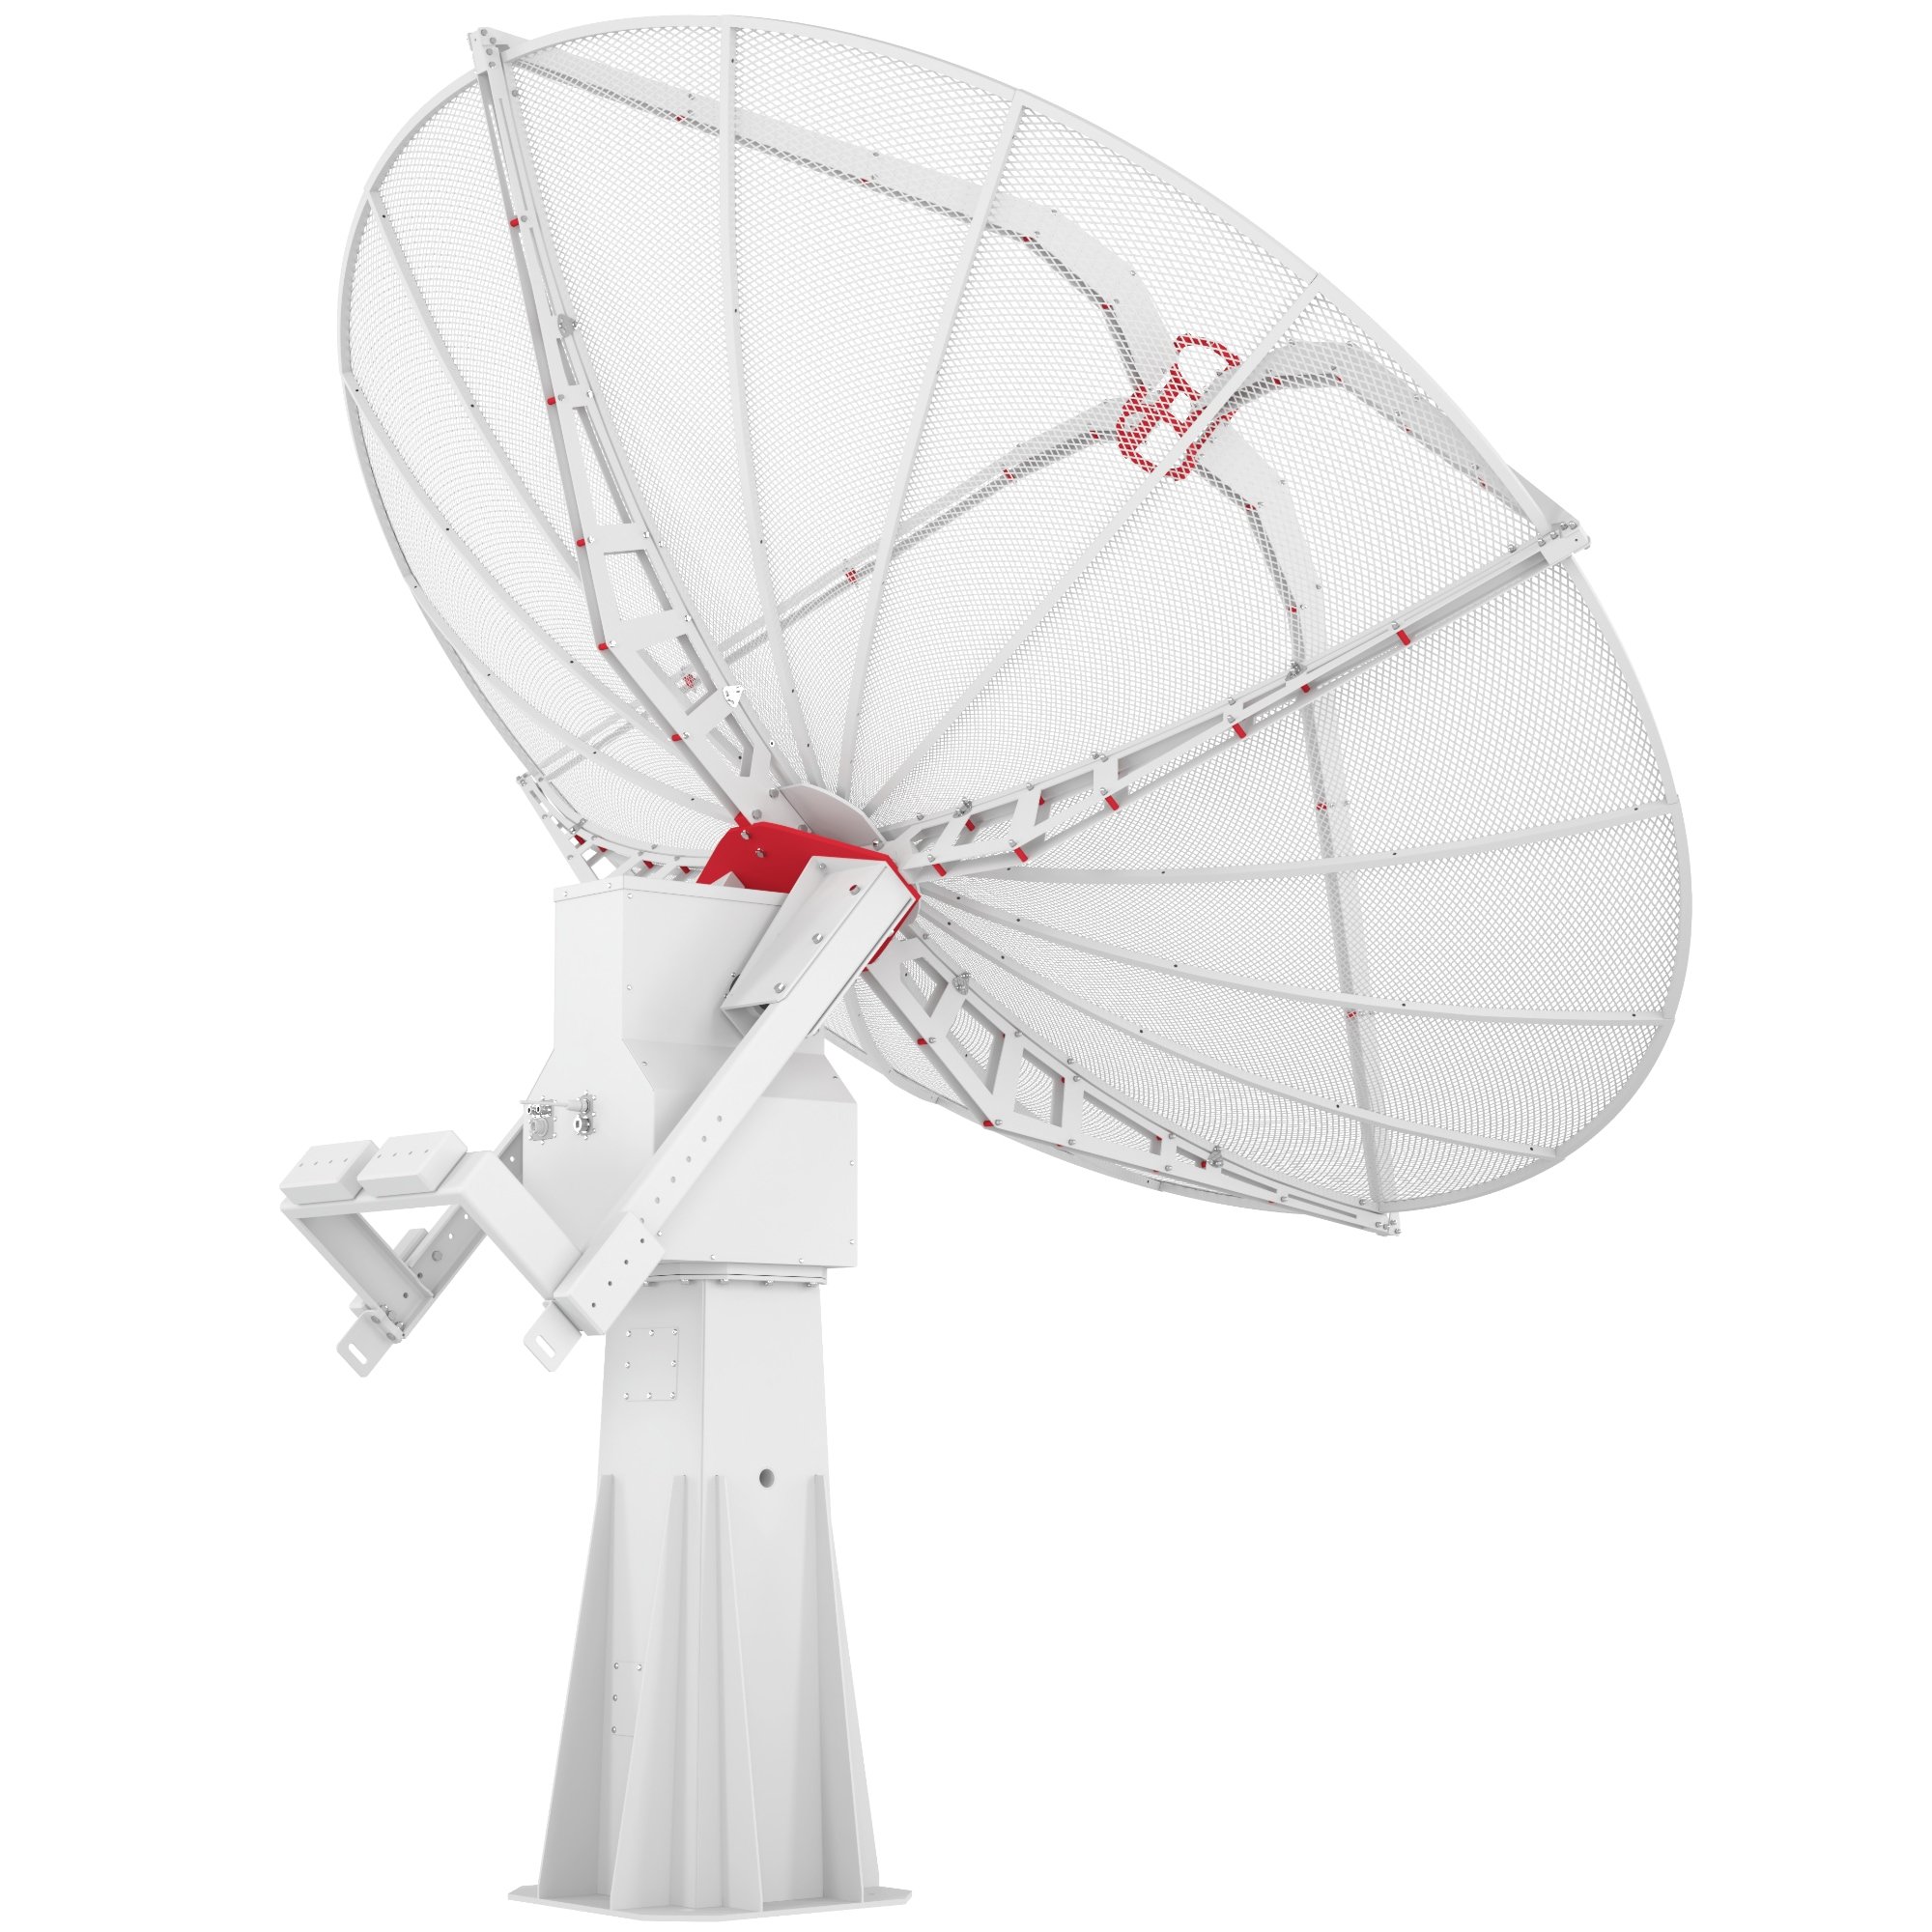 Dageraad agenda Vertrouwen INTREPID 300-5 3.0m ground station antenna system for L/S-band - Radio2Space